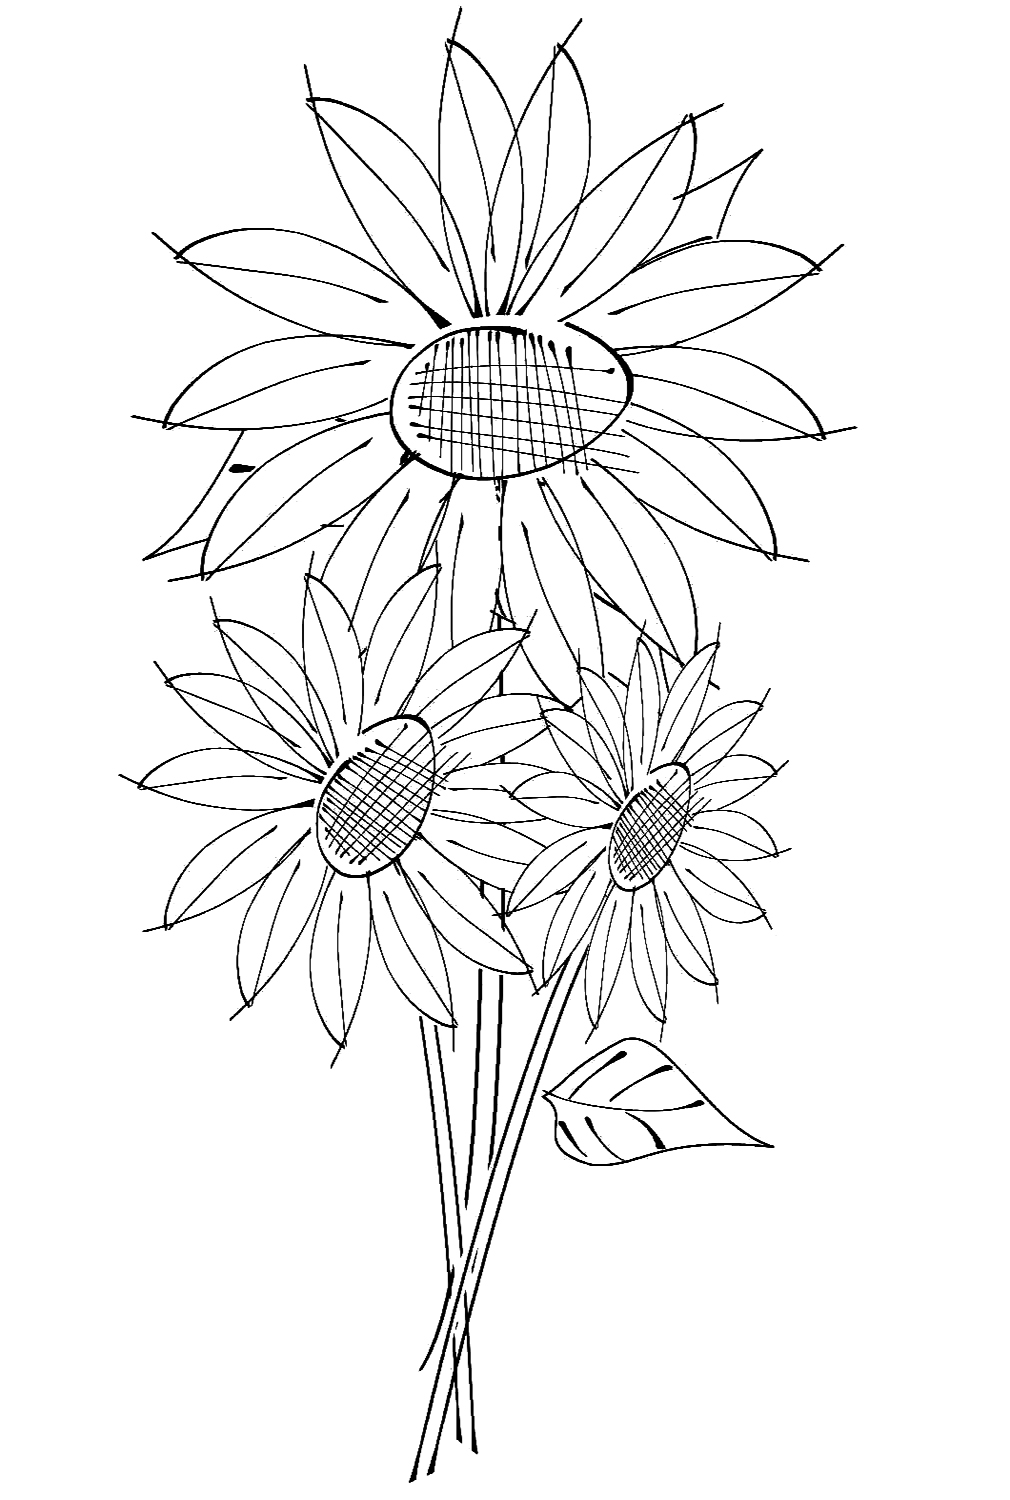 Sketch Of Sunflowers Coloring Page